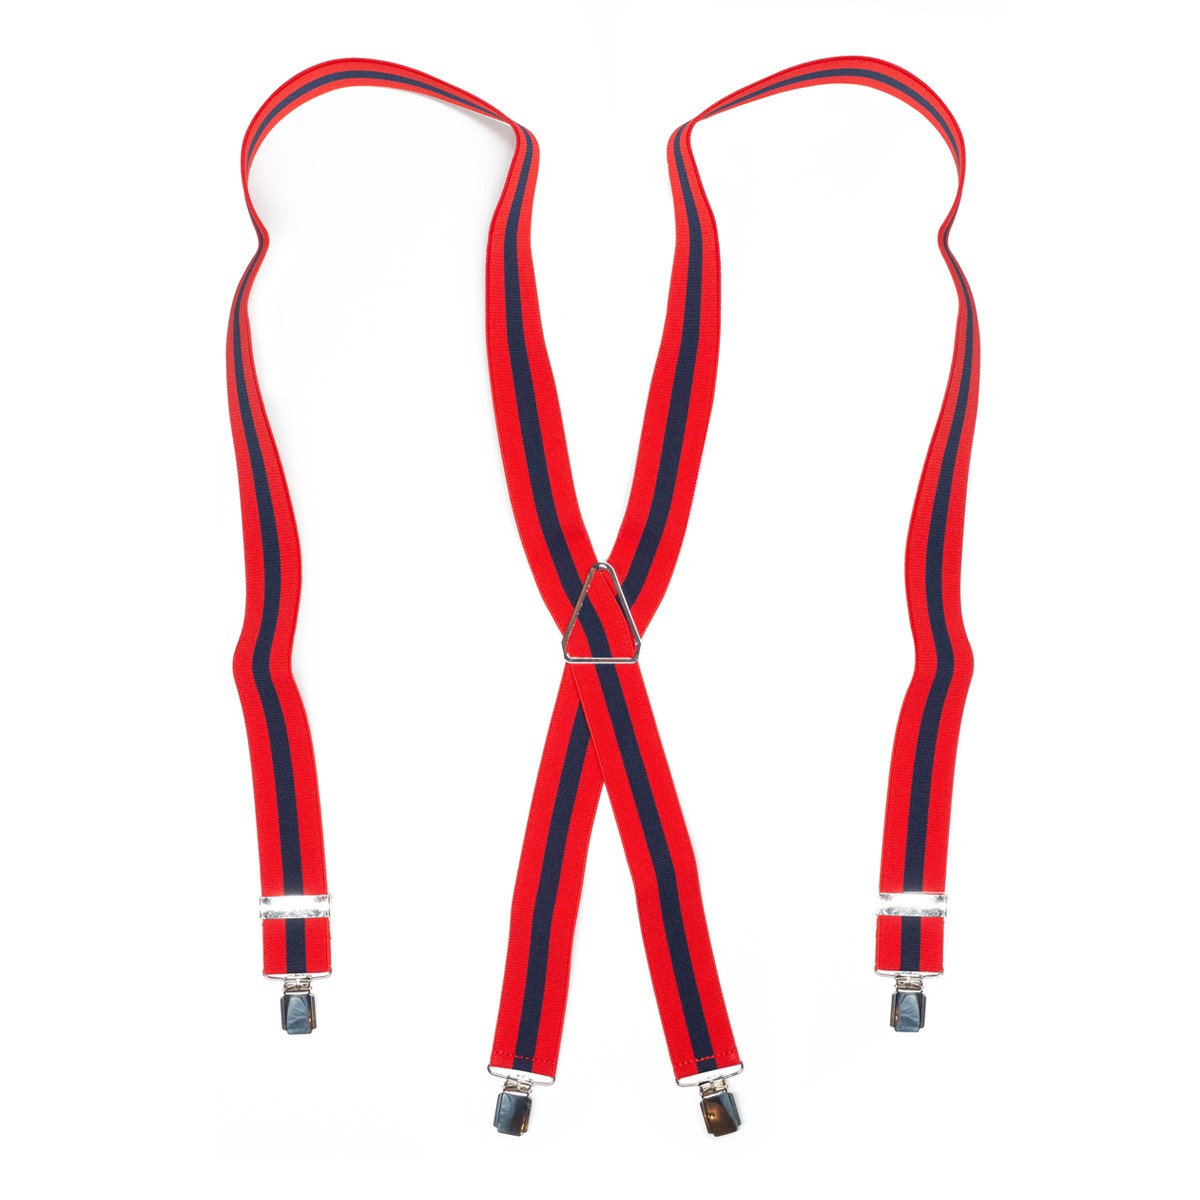 Suspender - stripes navy/red - X model - 35mm - no leather - big silver clips - metal triangle